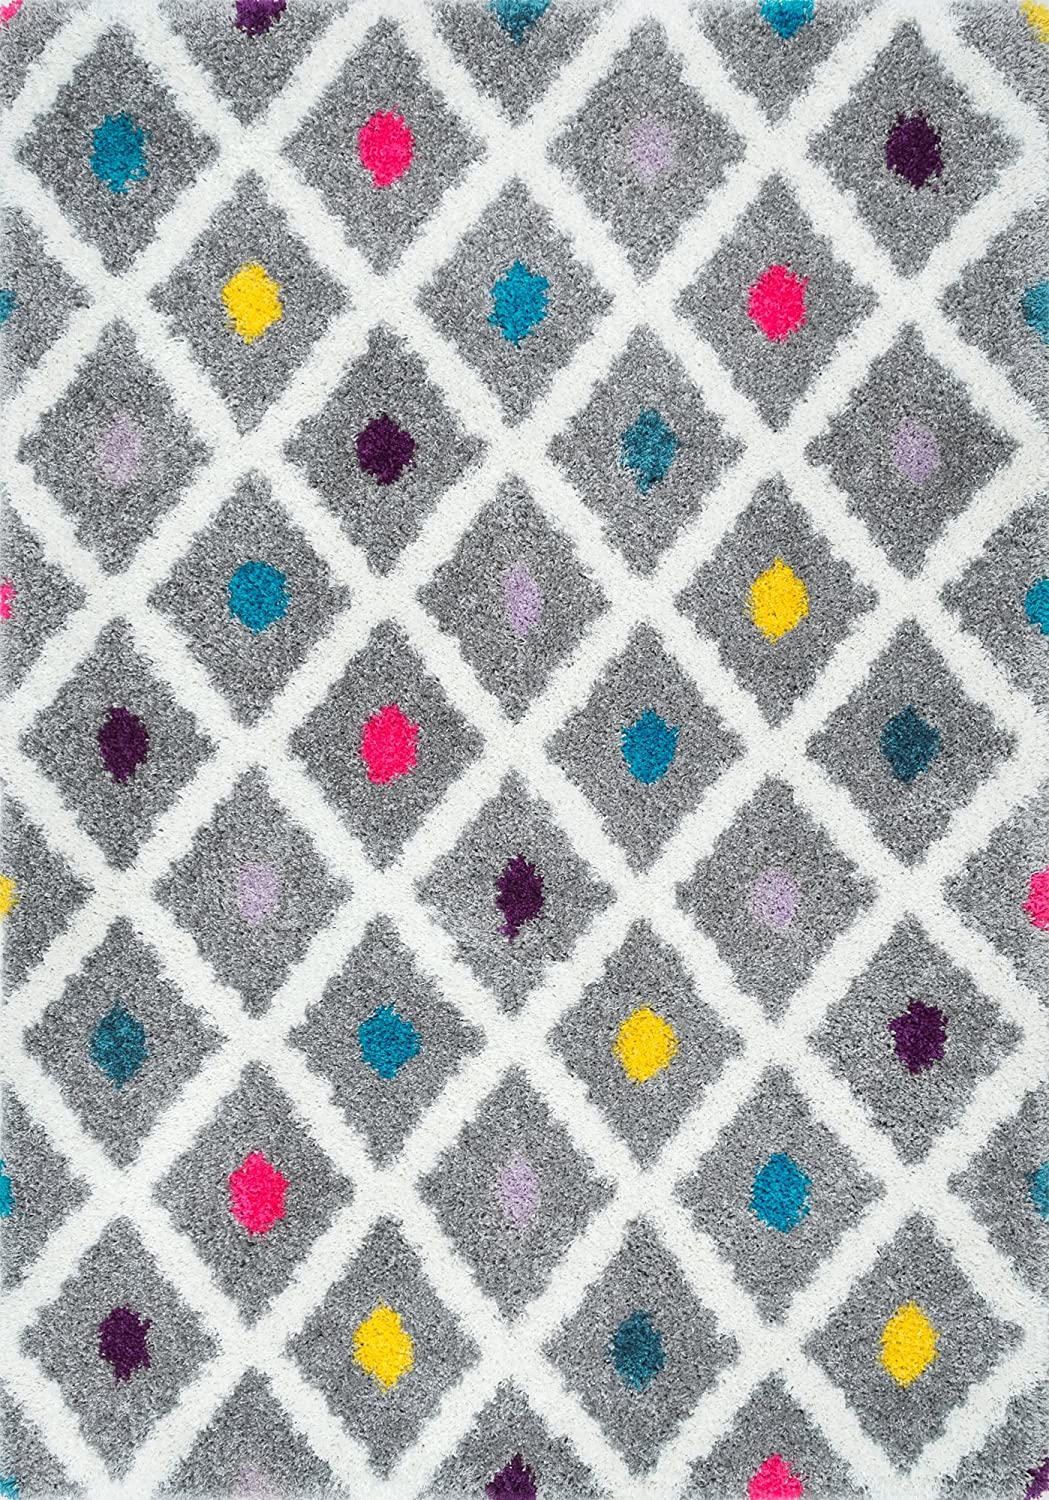 A gray rug is shown with a diamond pattern and small dots of different colors like yellow, teal, and pink. 